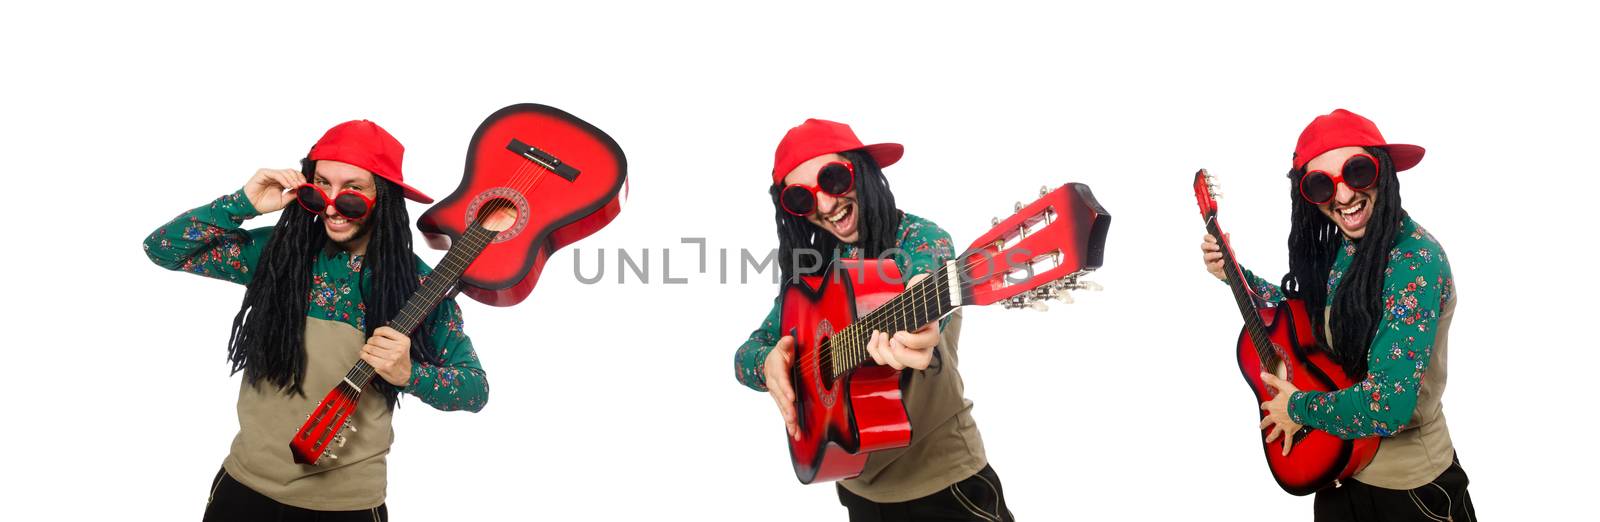 Man with guitar in musical concept on white